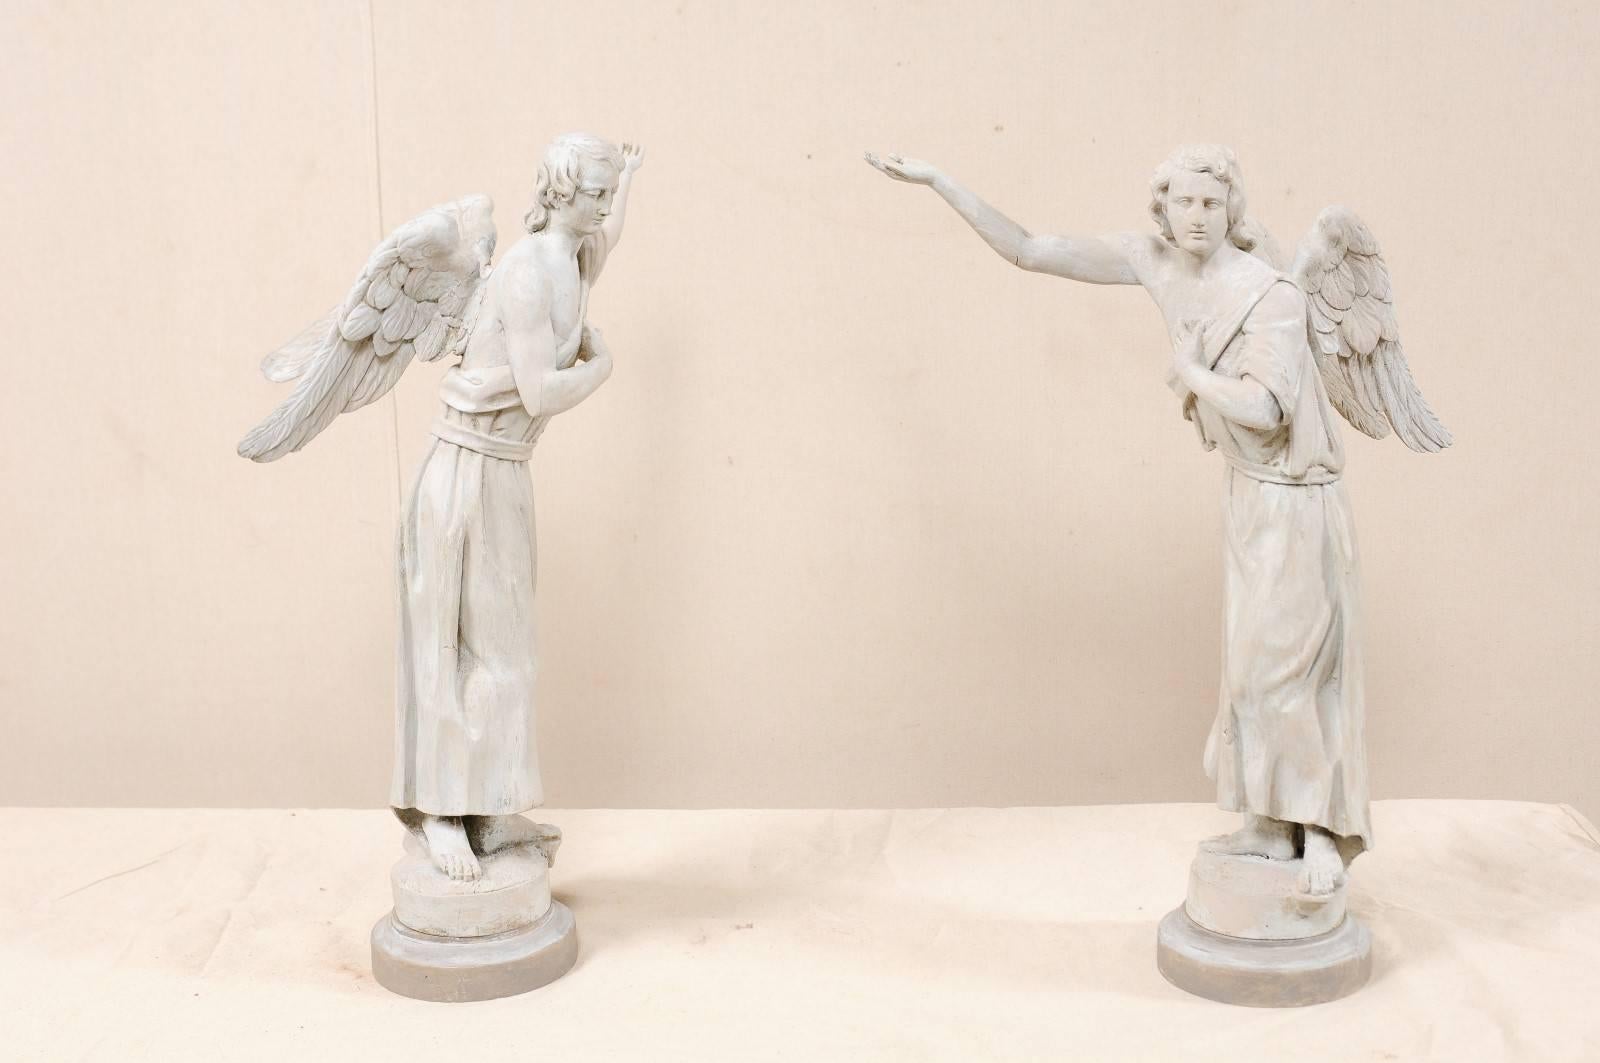 A pair of French carved wood angelic figures from the 19th century. This pair of antique figures are portrayed as an angel or winged male figure, draped loosely in a robe, with bare feet and shoulder, each having one arm reaching upwards with palm